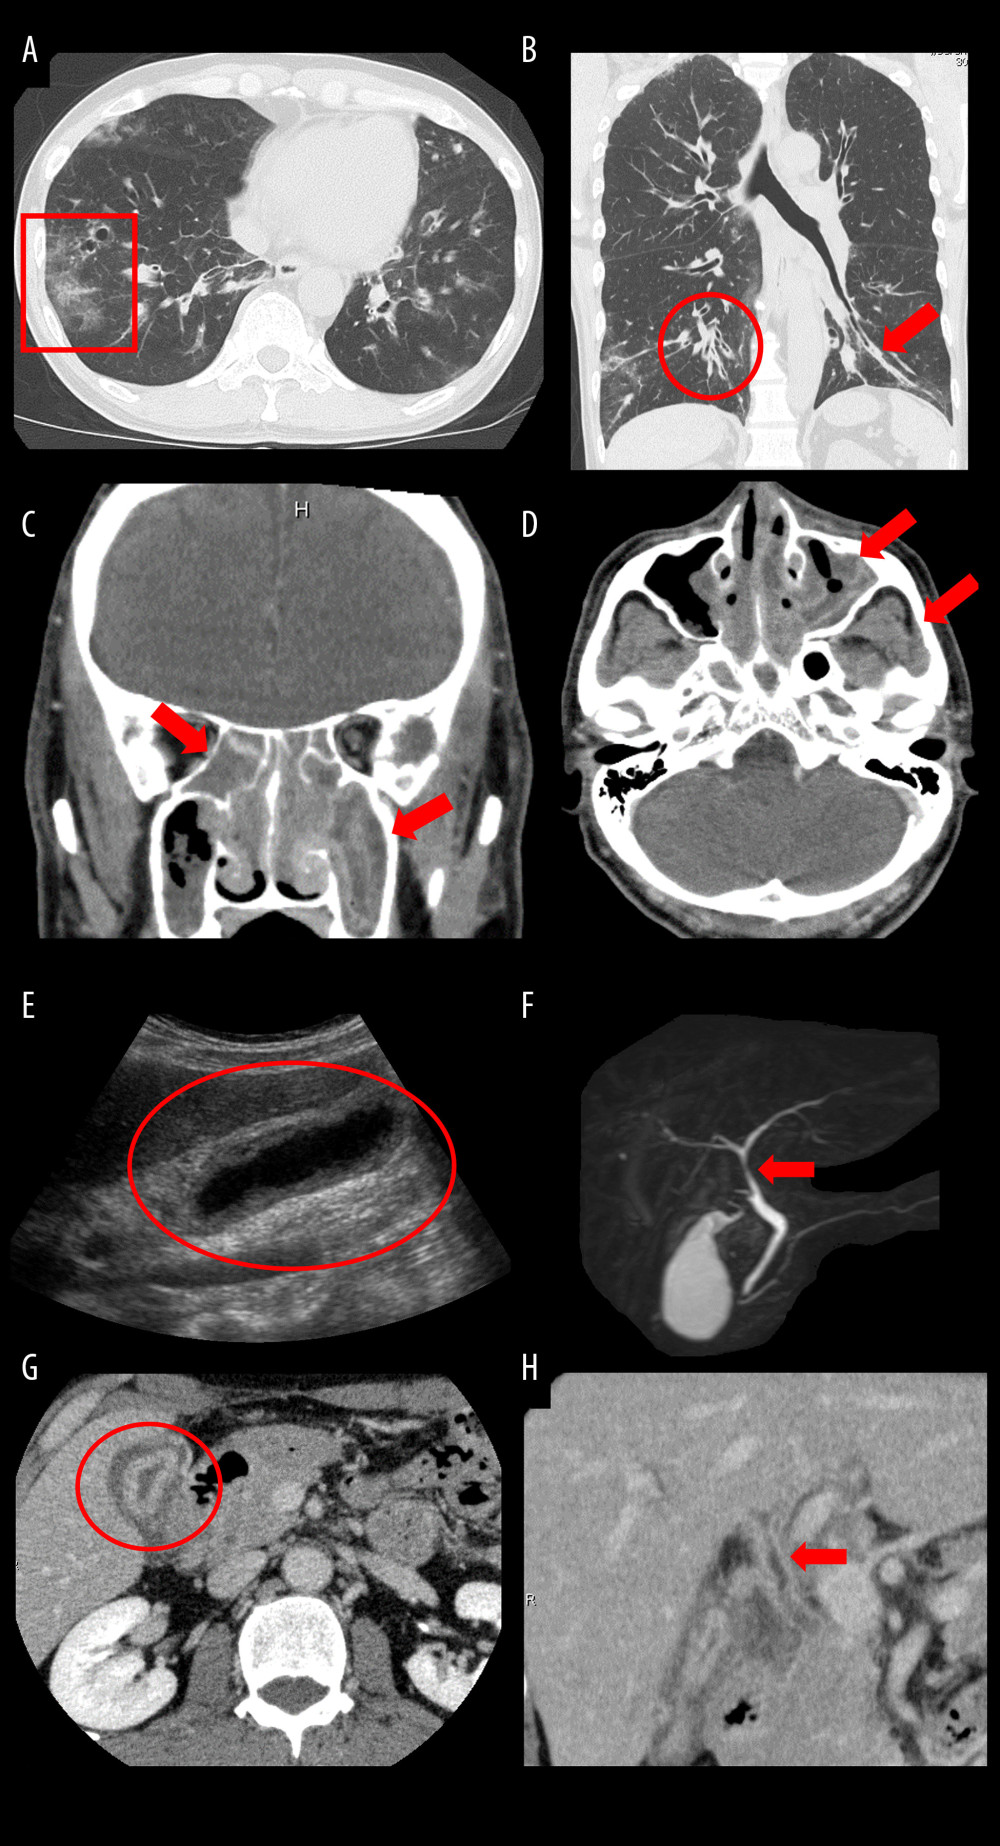 Radiological findings of major organ lesions. (A, B) Computed tomography (CT) scan of the chest showing predominant ground-glass opacities in the peripheral lower lobe of the right lung (square), bronchial wall thickening in the lower lobe (circle), and mucus plugs (arrow). (C, D) CT scan of the paranasal sinuses showing soft tissue densities and mucosal thickening of the nasal mucosa, predominantly in the left maxillary sinus (arrow). (E) Abdominal ultrasonogram showing circumferential thickening of the medial layer of the gallbladder wall (circle). (F) Magnetic resonance cholangiopancreatography scan showing stenosis of the common hepatic duct (arrow). (G, H) Abdominal contrast-enhanced CT scan showing diffuse wall thickening with subserosal edema that can be seen consecutively throughout the gallbladder, cystic duct, left and right hepatic ducts, and common bile duct (circle and arrow).